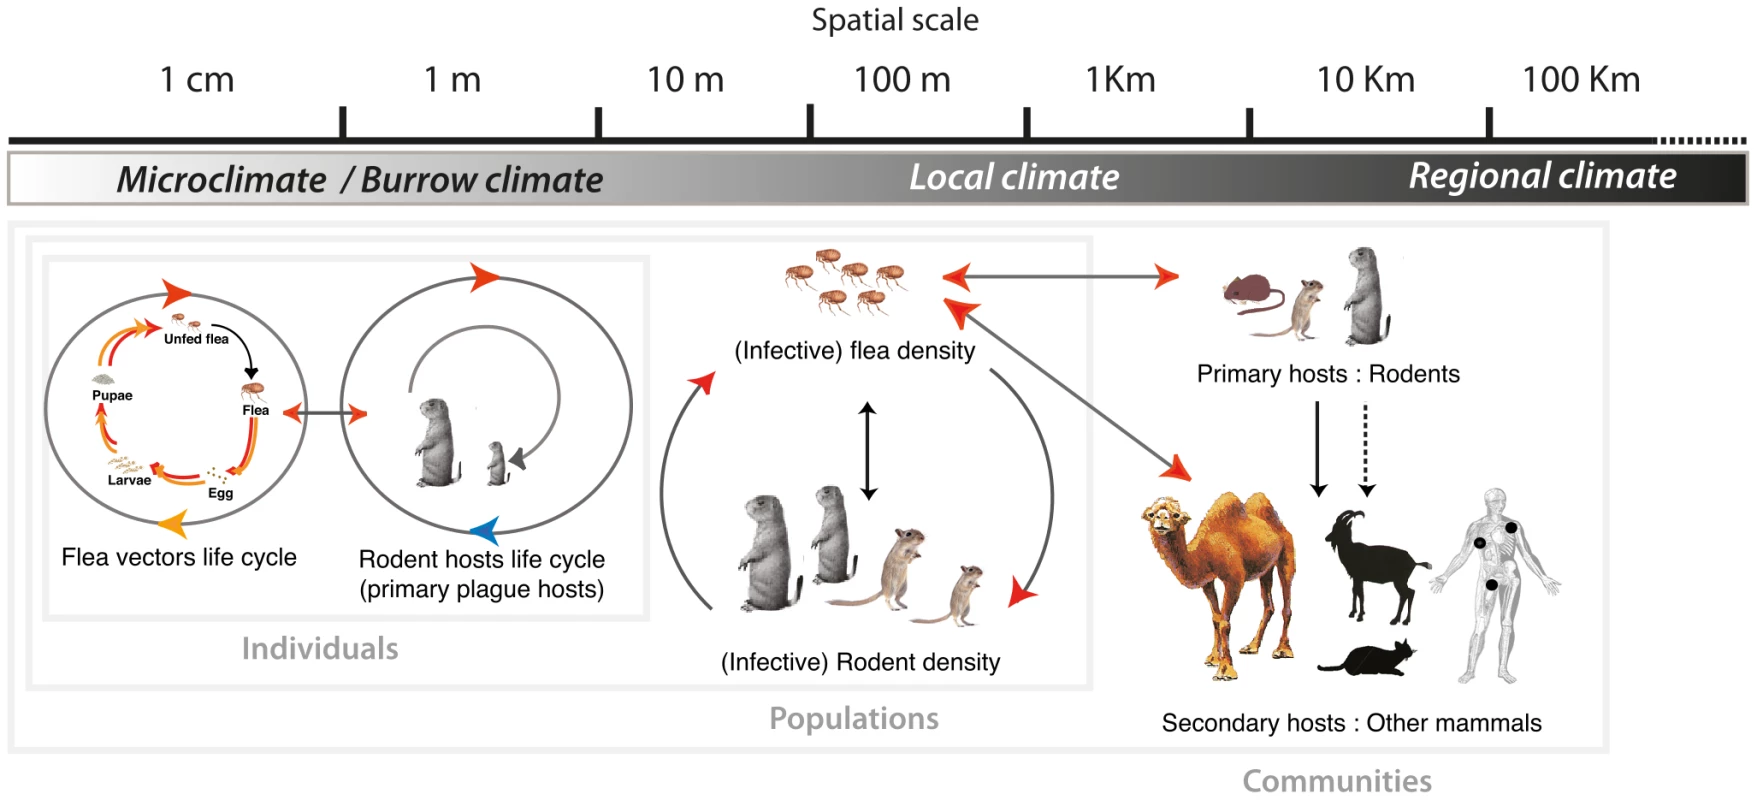 Illustration of the abiotic environment impact on the plague cycle as a function of spatial scale.